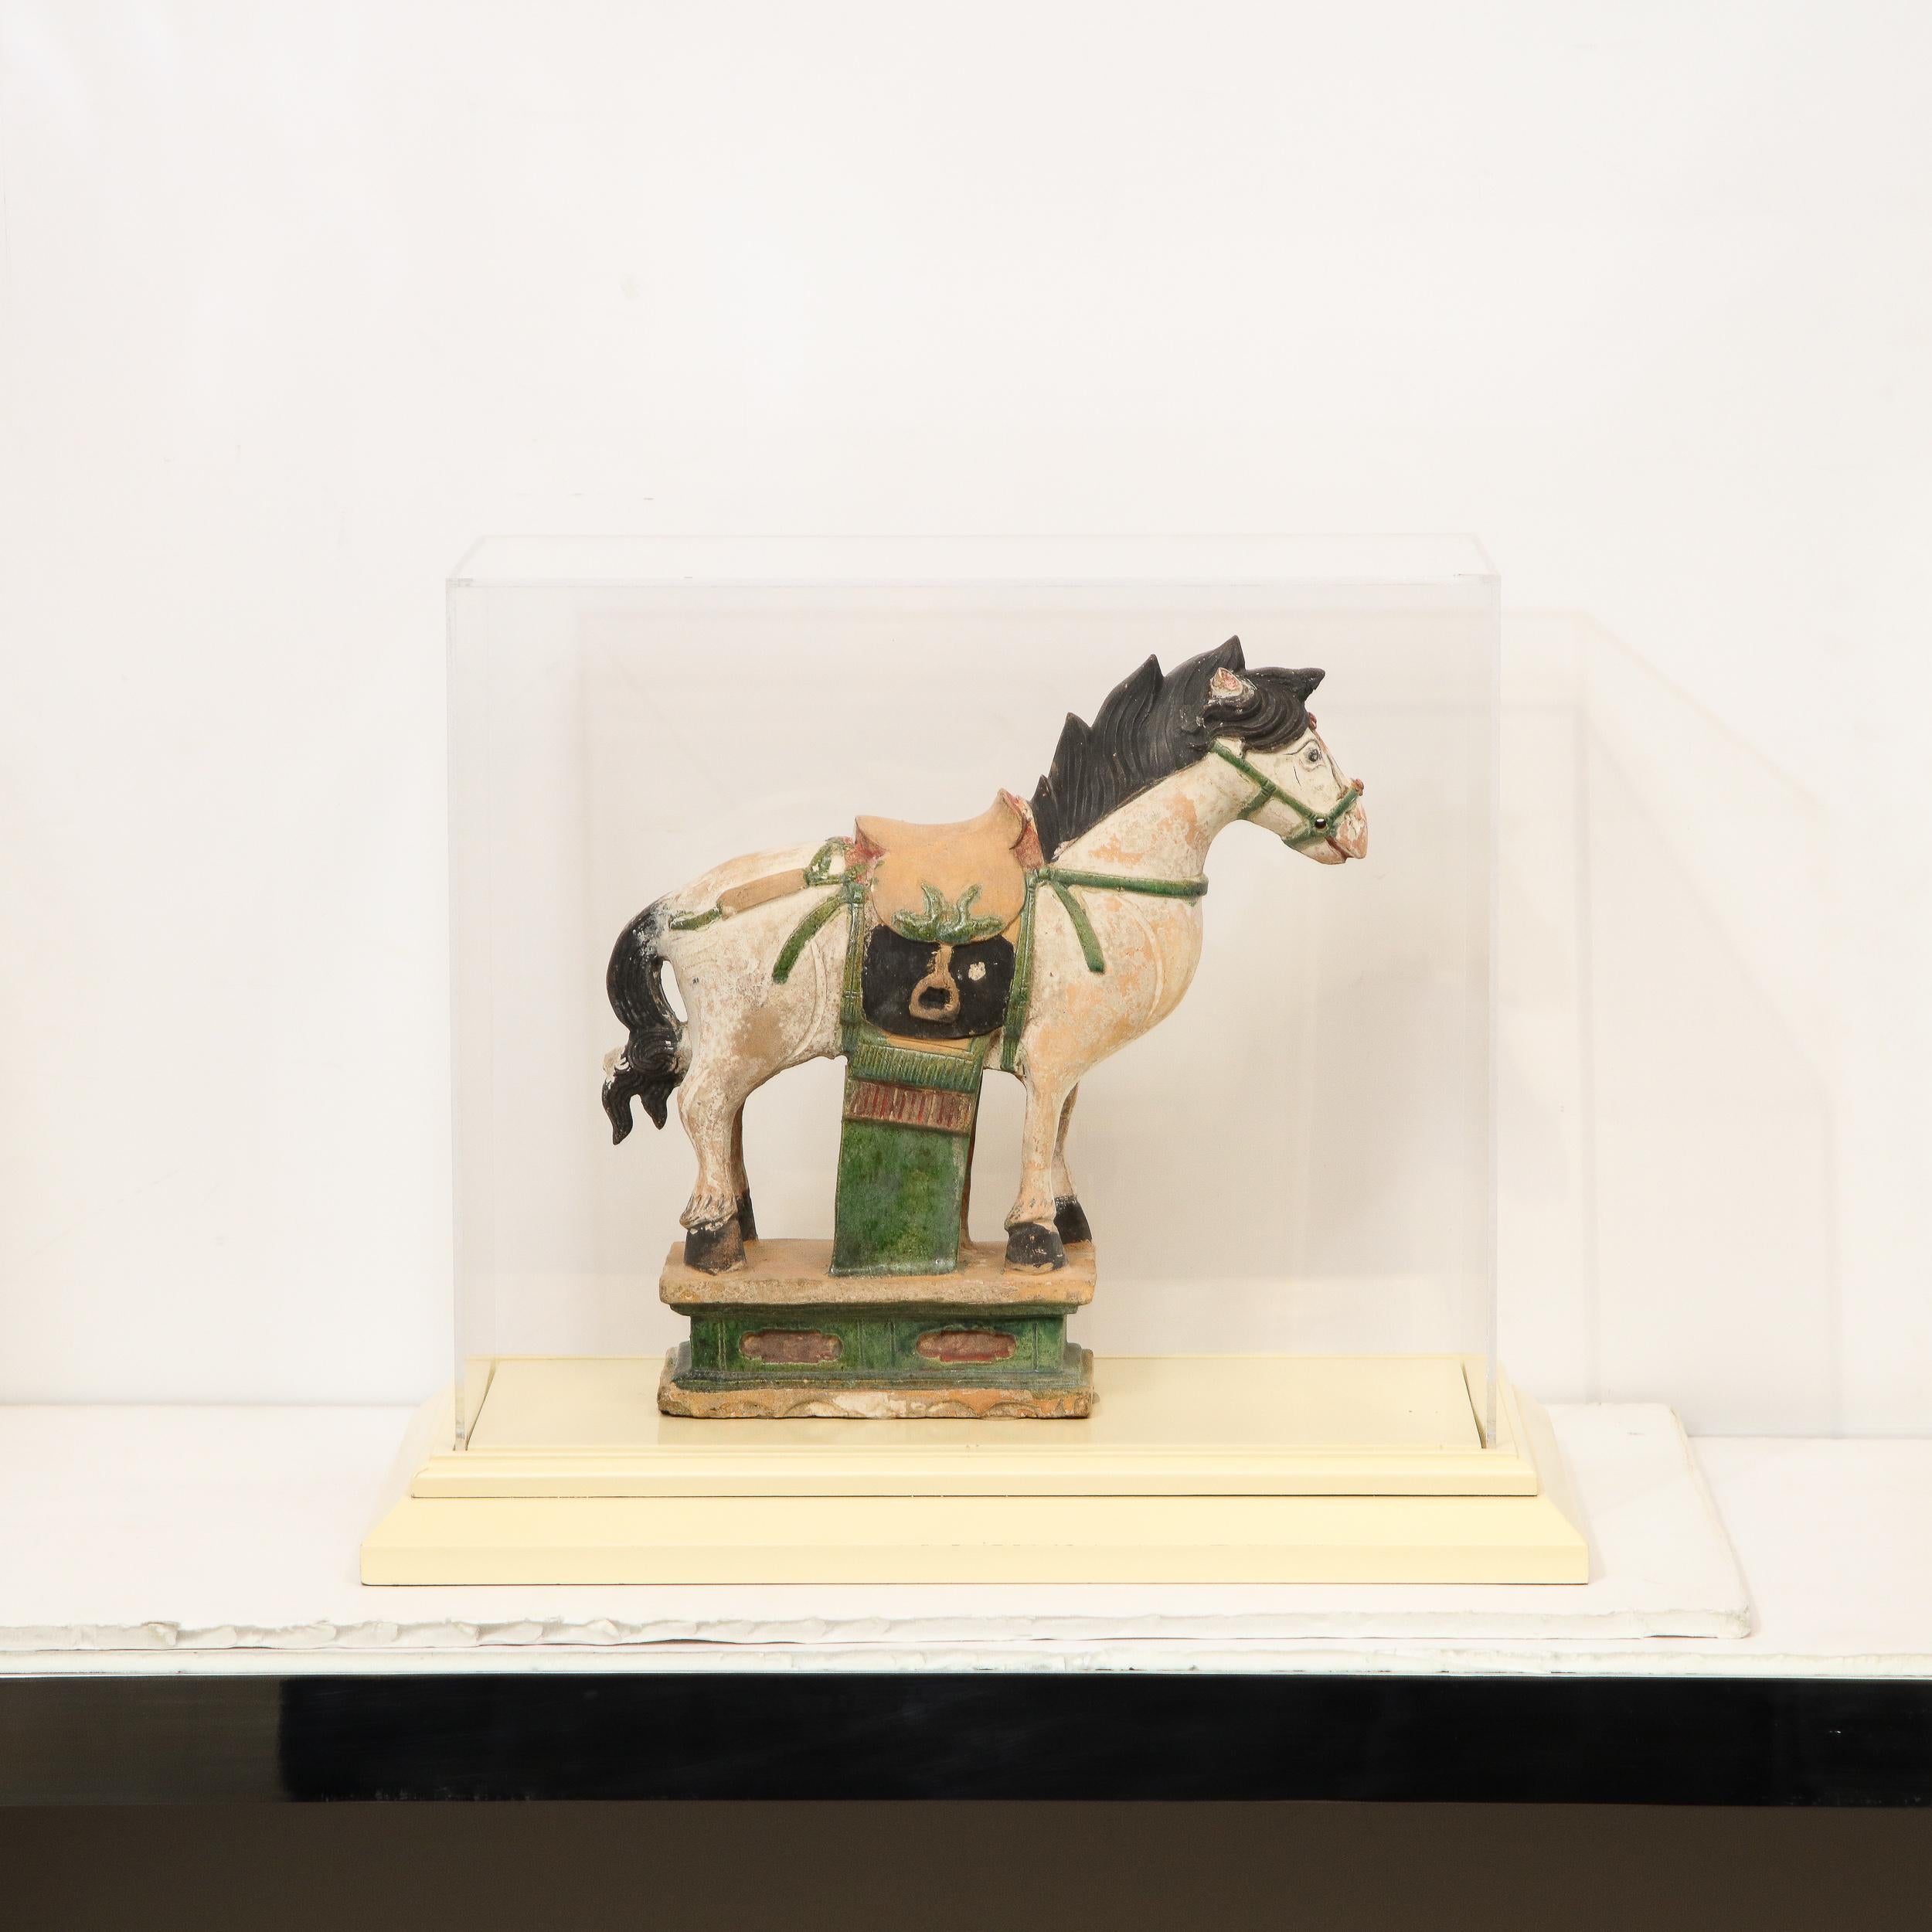 Realized between 1368AD-1644 AD, this stunning documented horse figurine was realized in China during the Ming period. Executed using a Sacai glaze, the sculpture offers a cream colored equine figure with a muted matte black mane and tail. Parts of